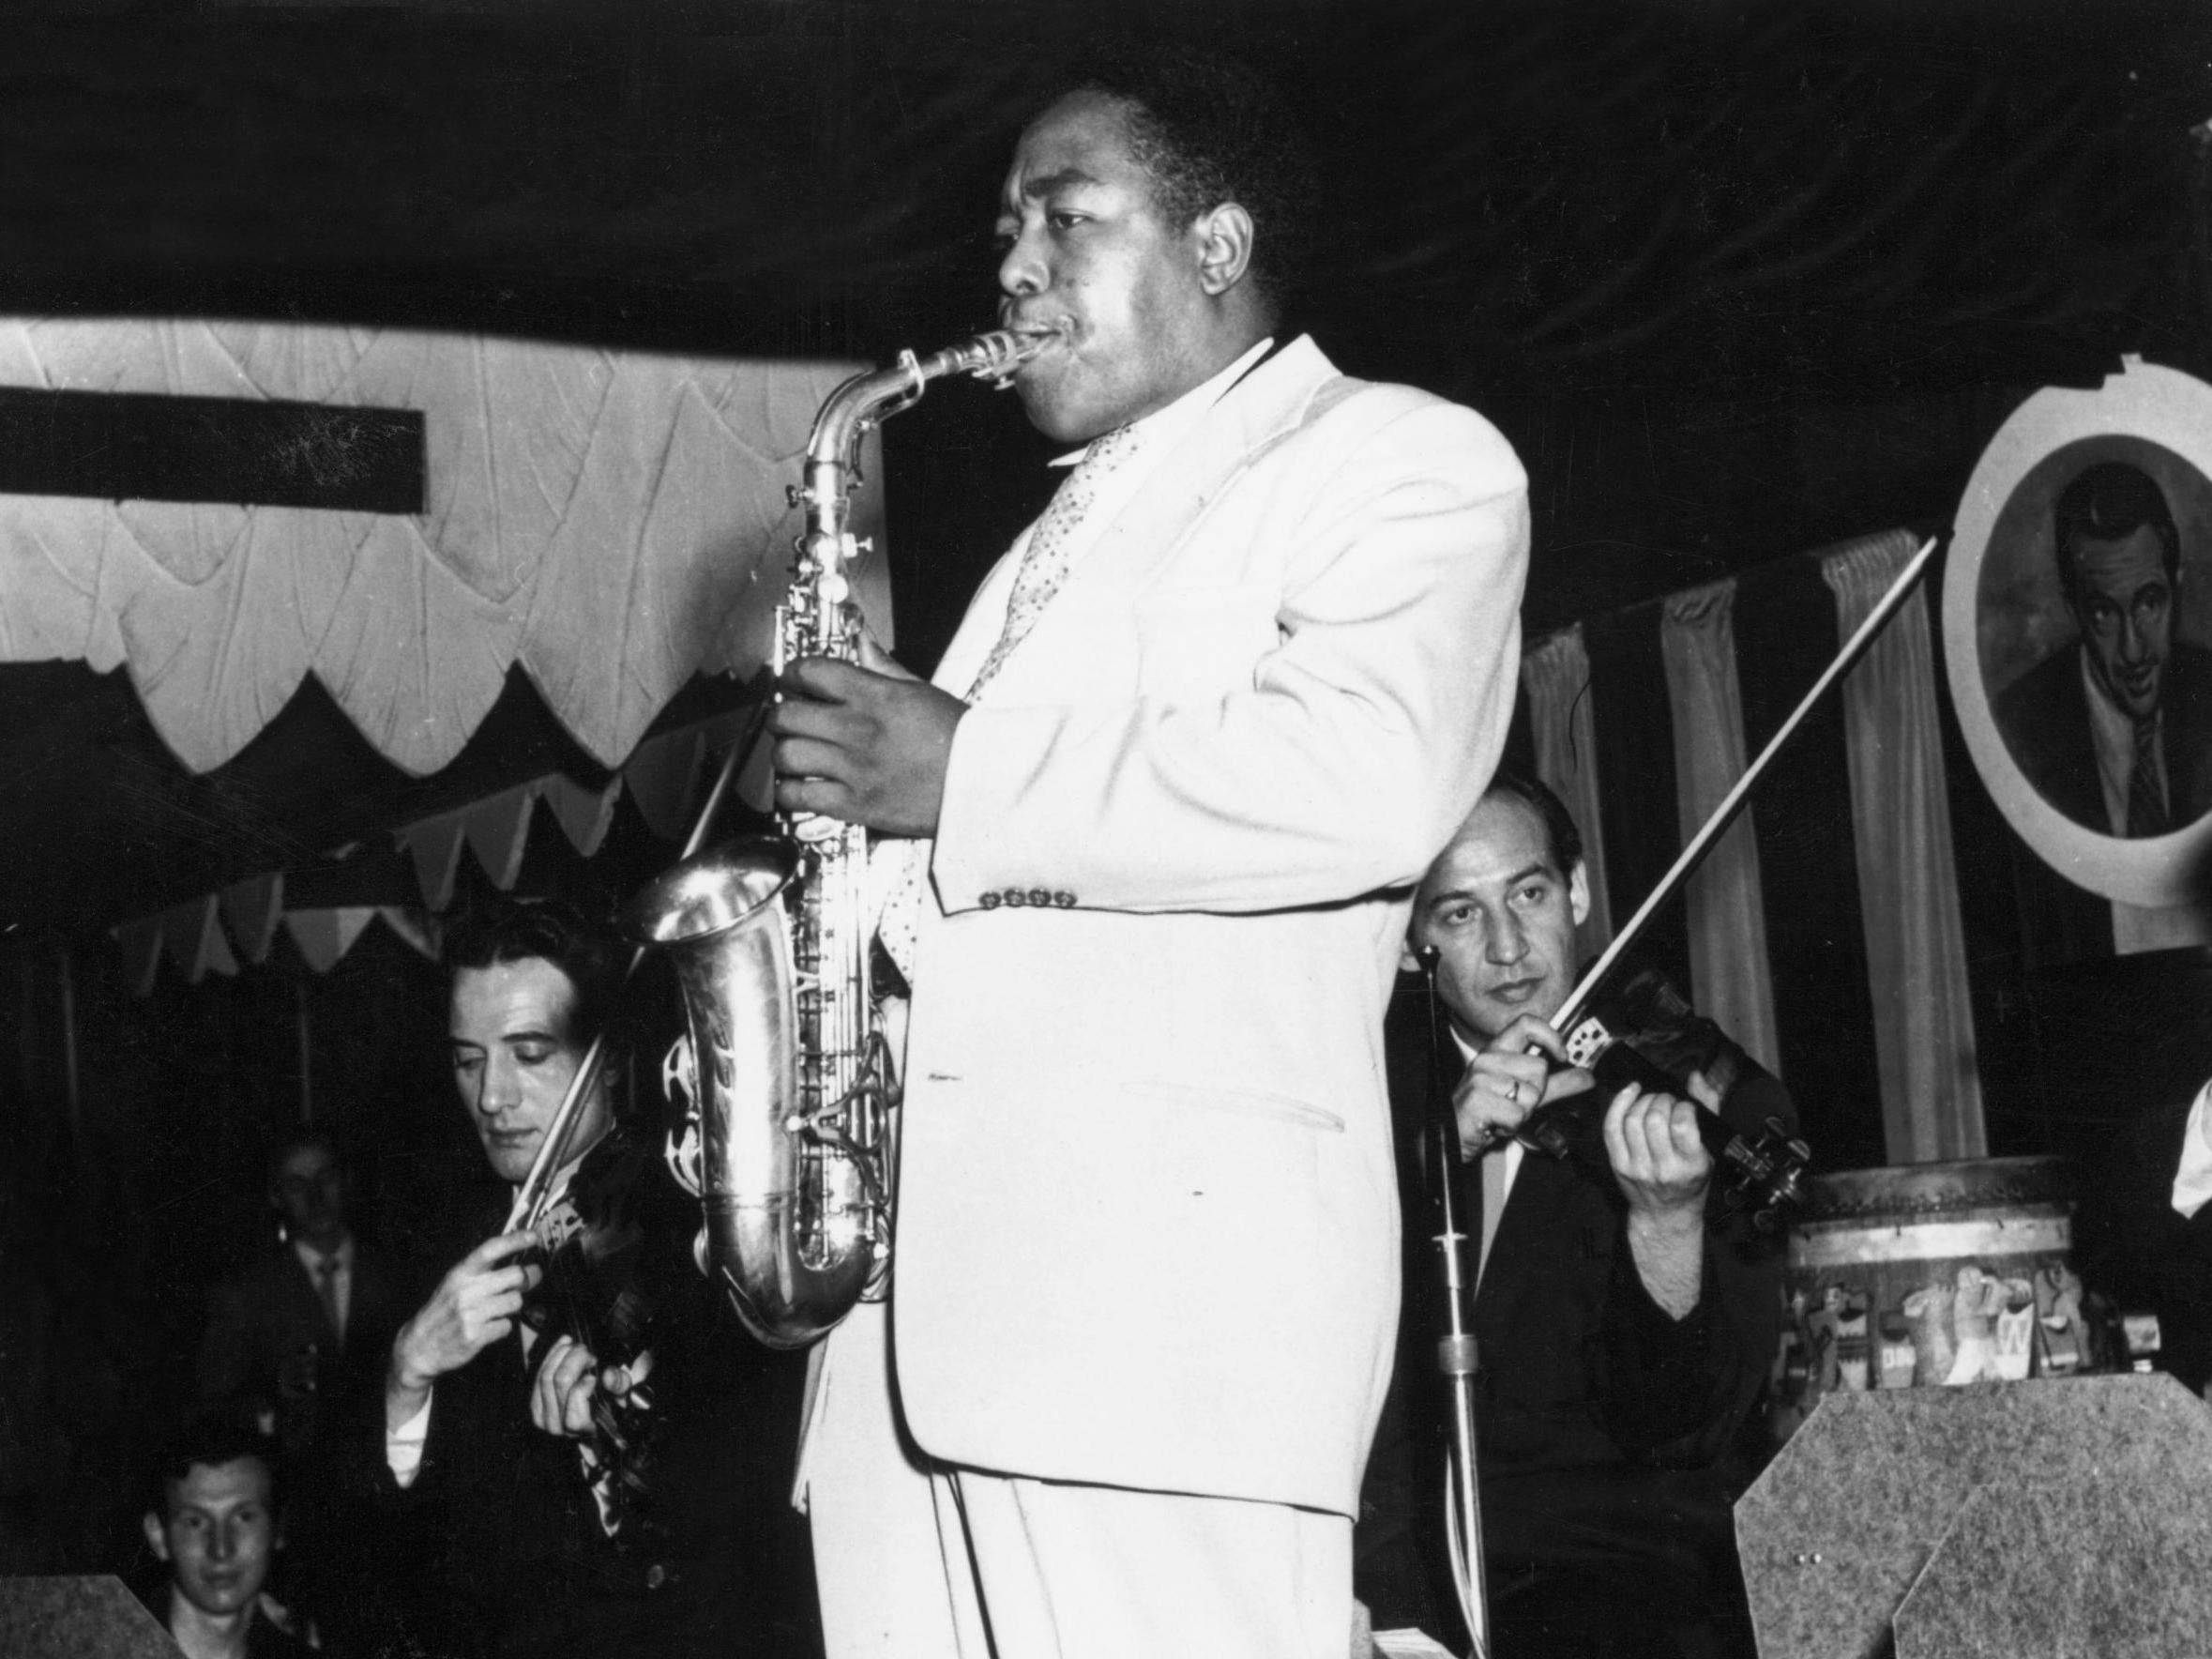 Charlie Bird Parker The tragic saxophone genius with a voracious appetite for drugs, hard liquor and jazz The Independent The Independent image picture photo